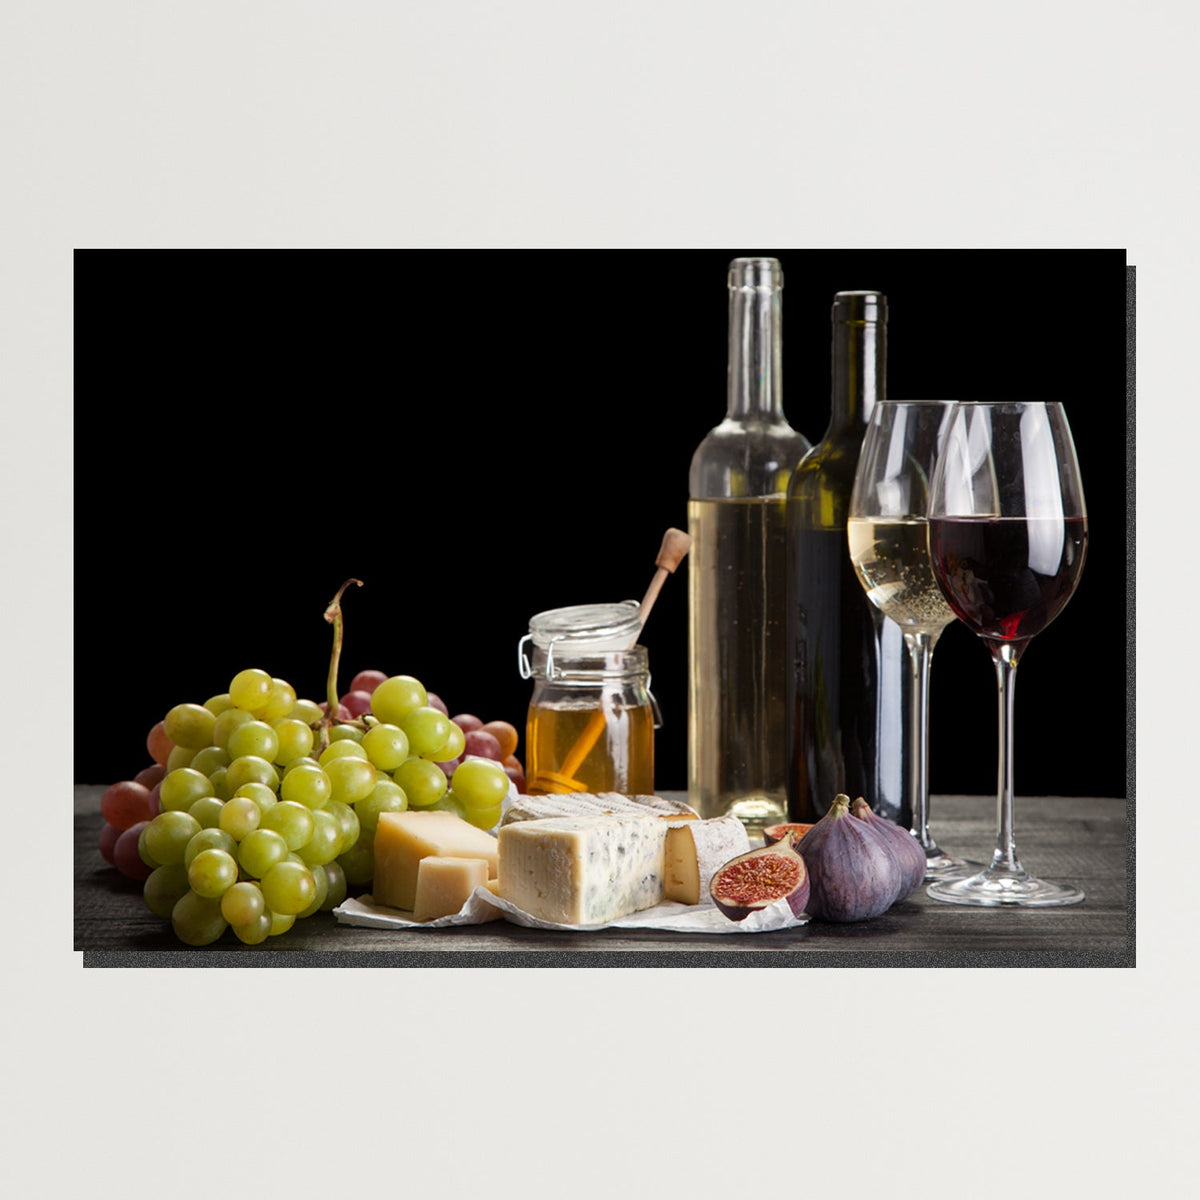 https://cdn.shopify.com/s/files/1/0387/9986/8044/products/GrapesWineandCheeseCanvasArtprintStretched-Plain.jpg